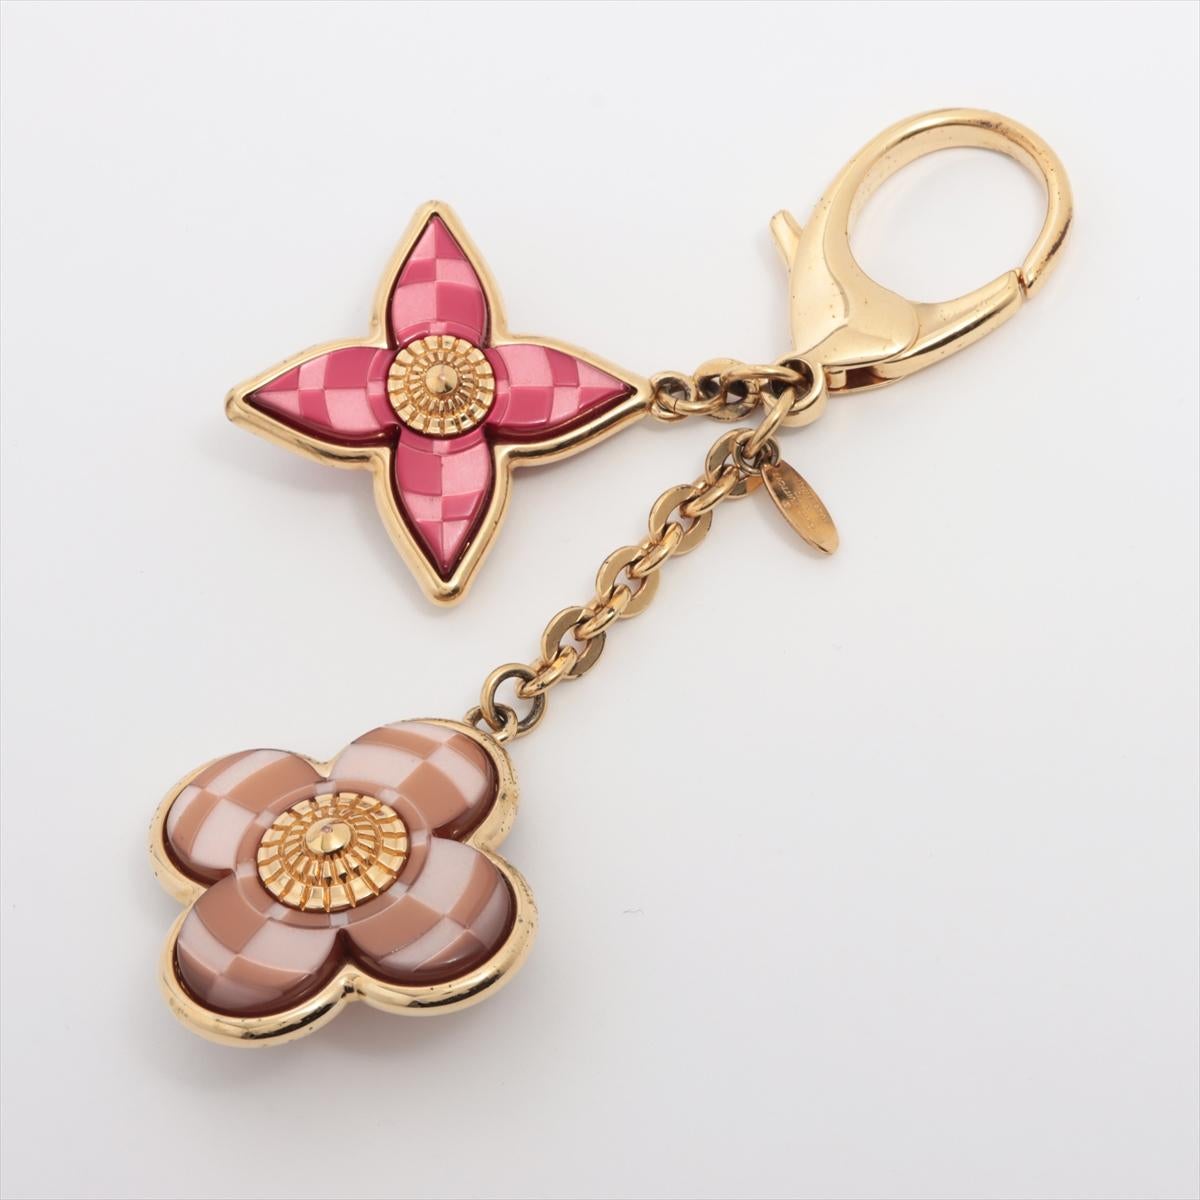 Louis Vuitton LV Mosaic Flower Bicolor Bag Charm In Good Condition For Sale In Indianapolis, IN